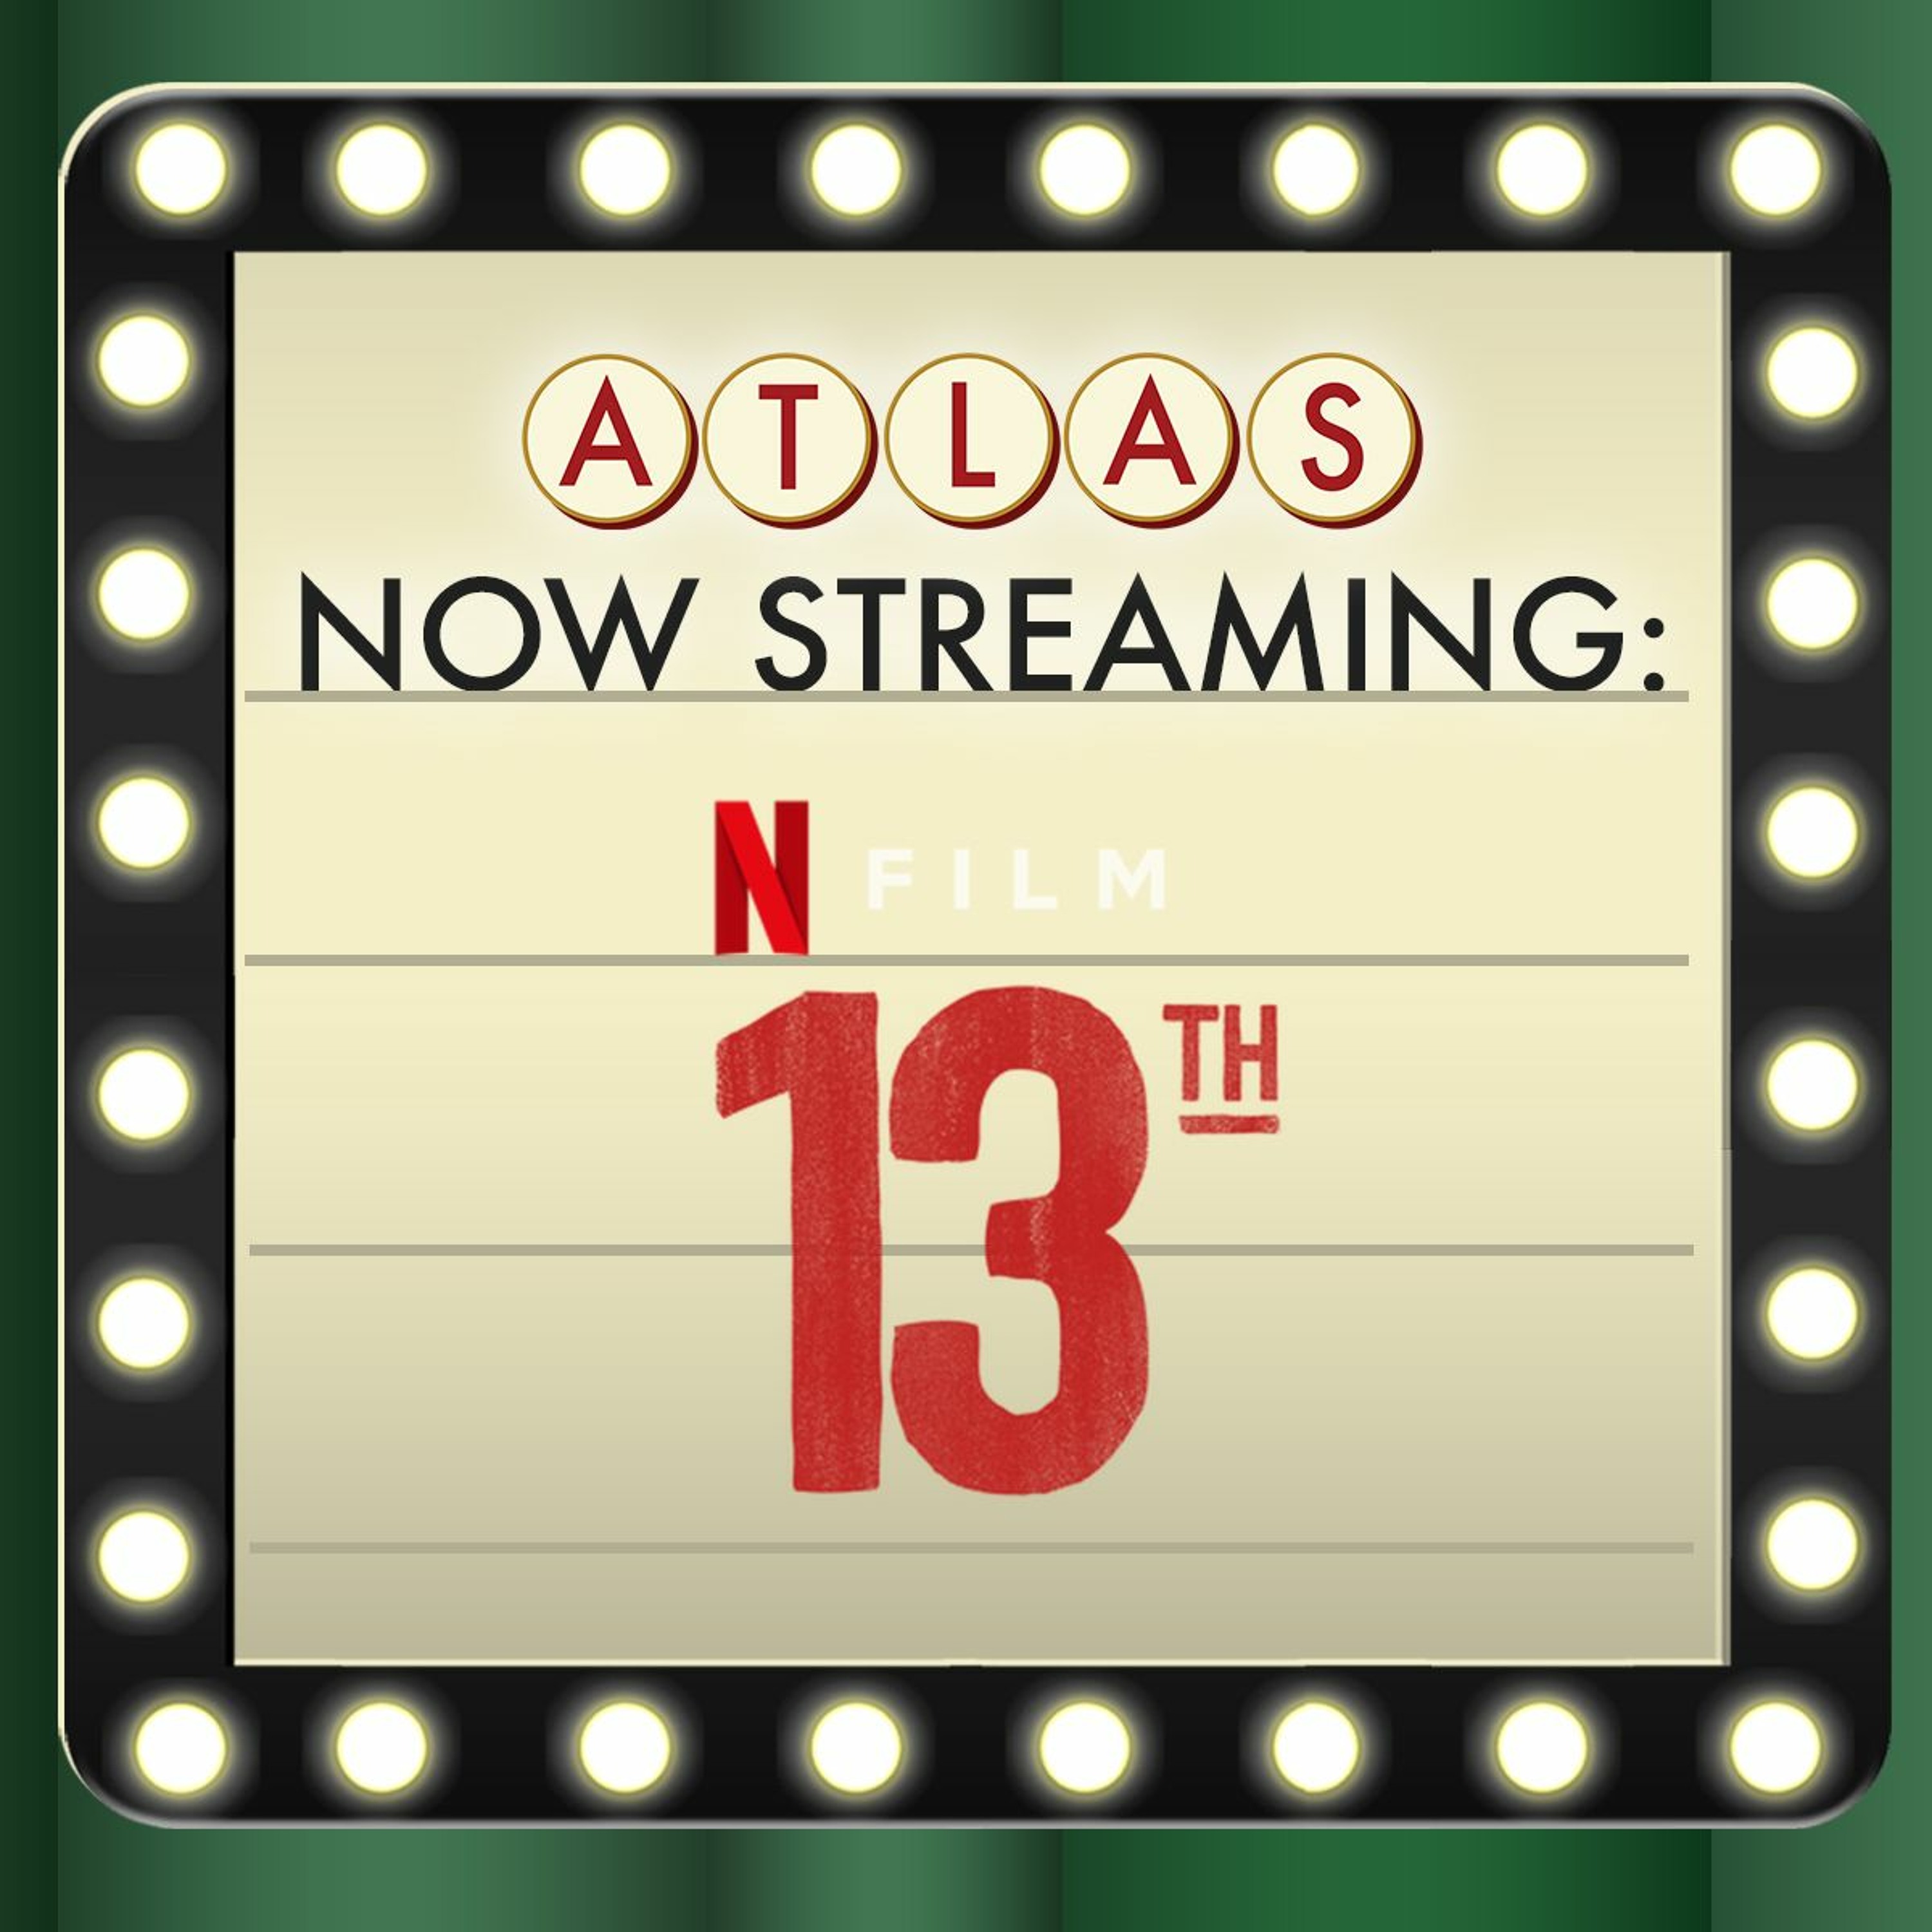 13th - Atlas Now Streaming 67